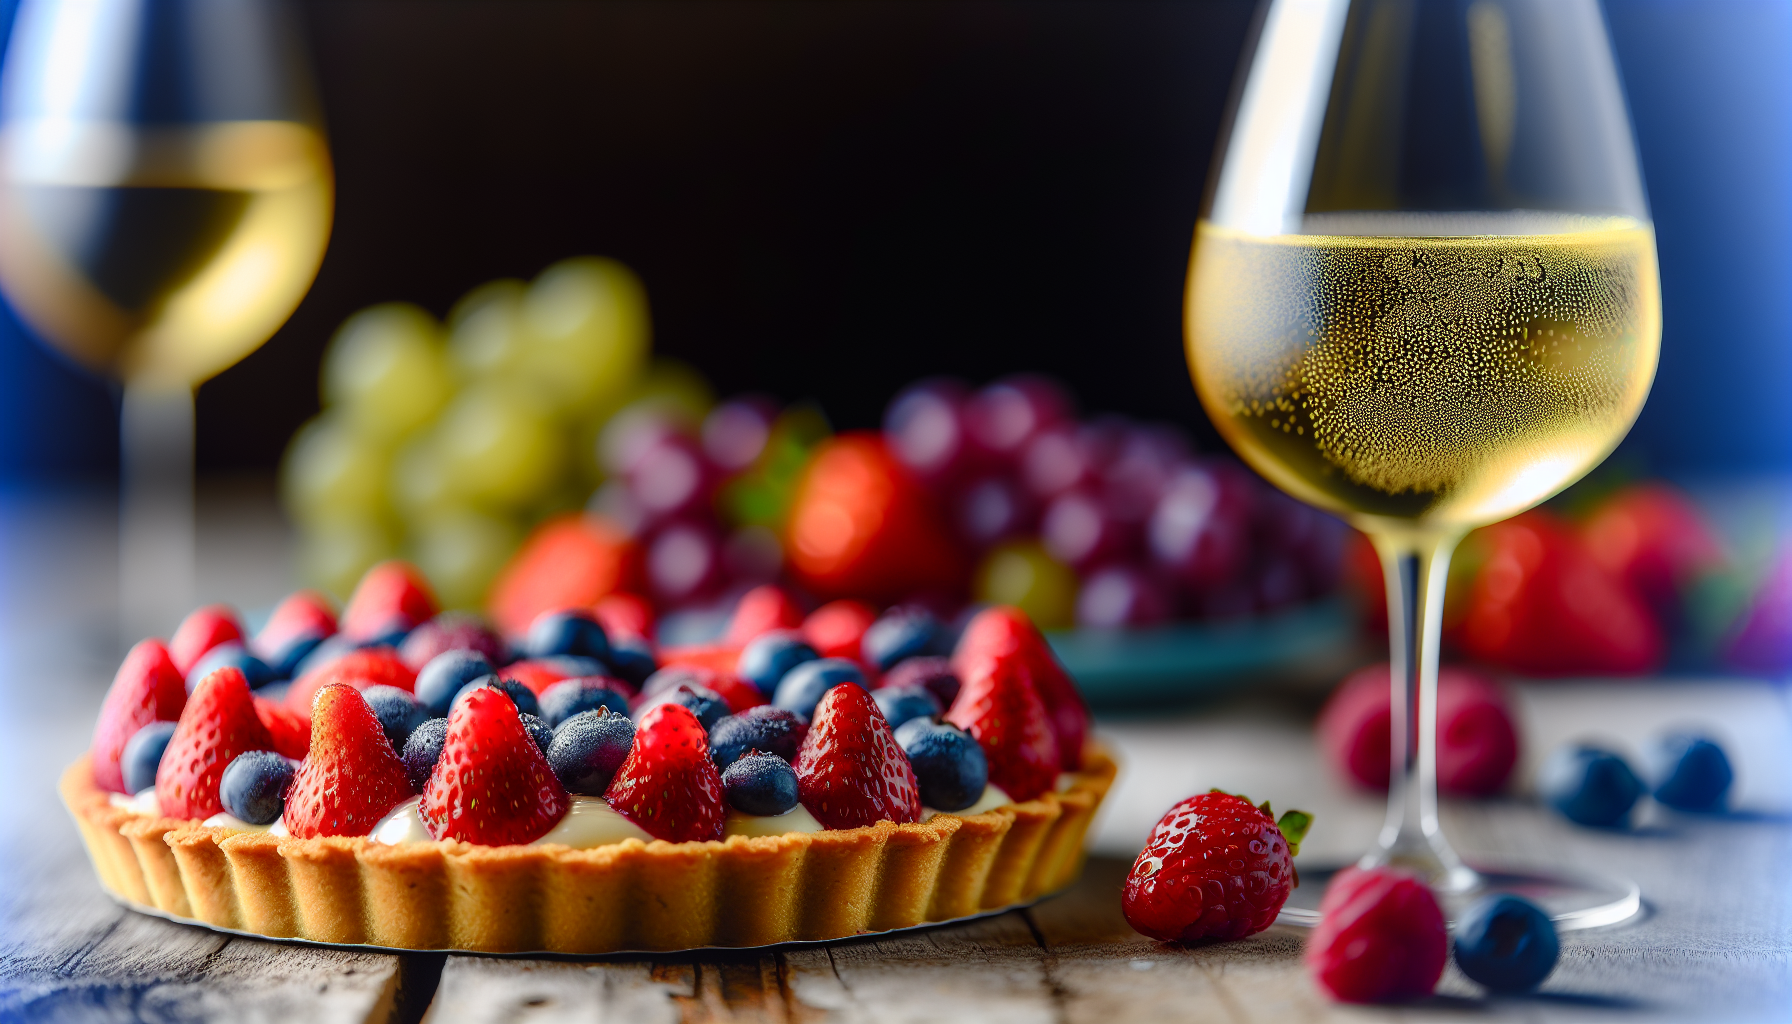 Delicious fruit tart served with a glass of sweet white wine